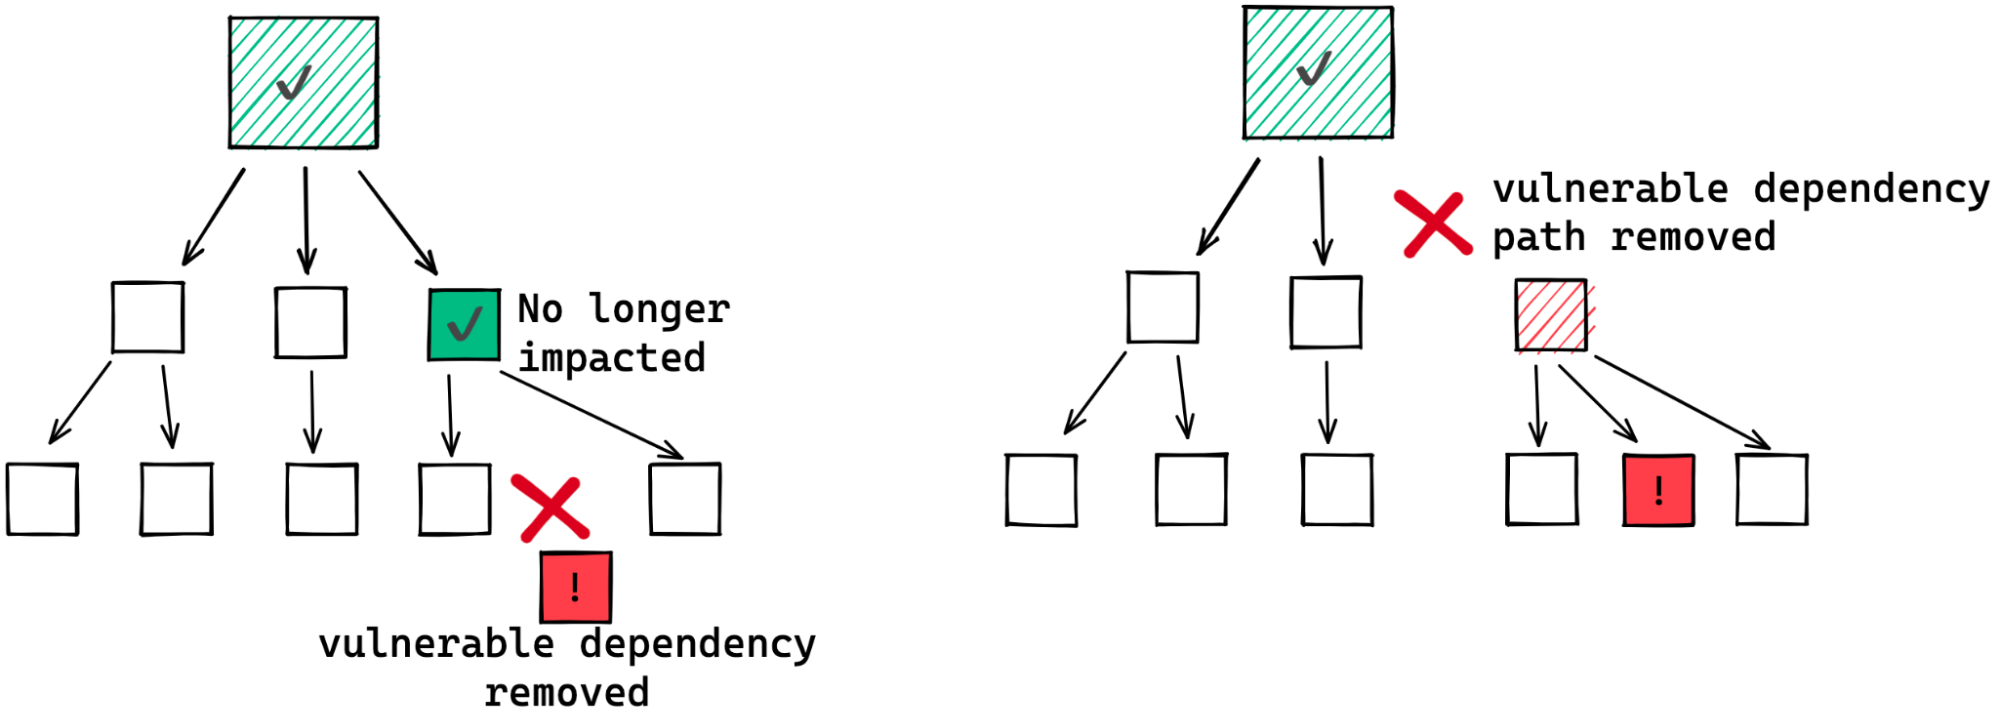 A vulnerability in a dependency can be mitigated by removing that dependency.